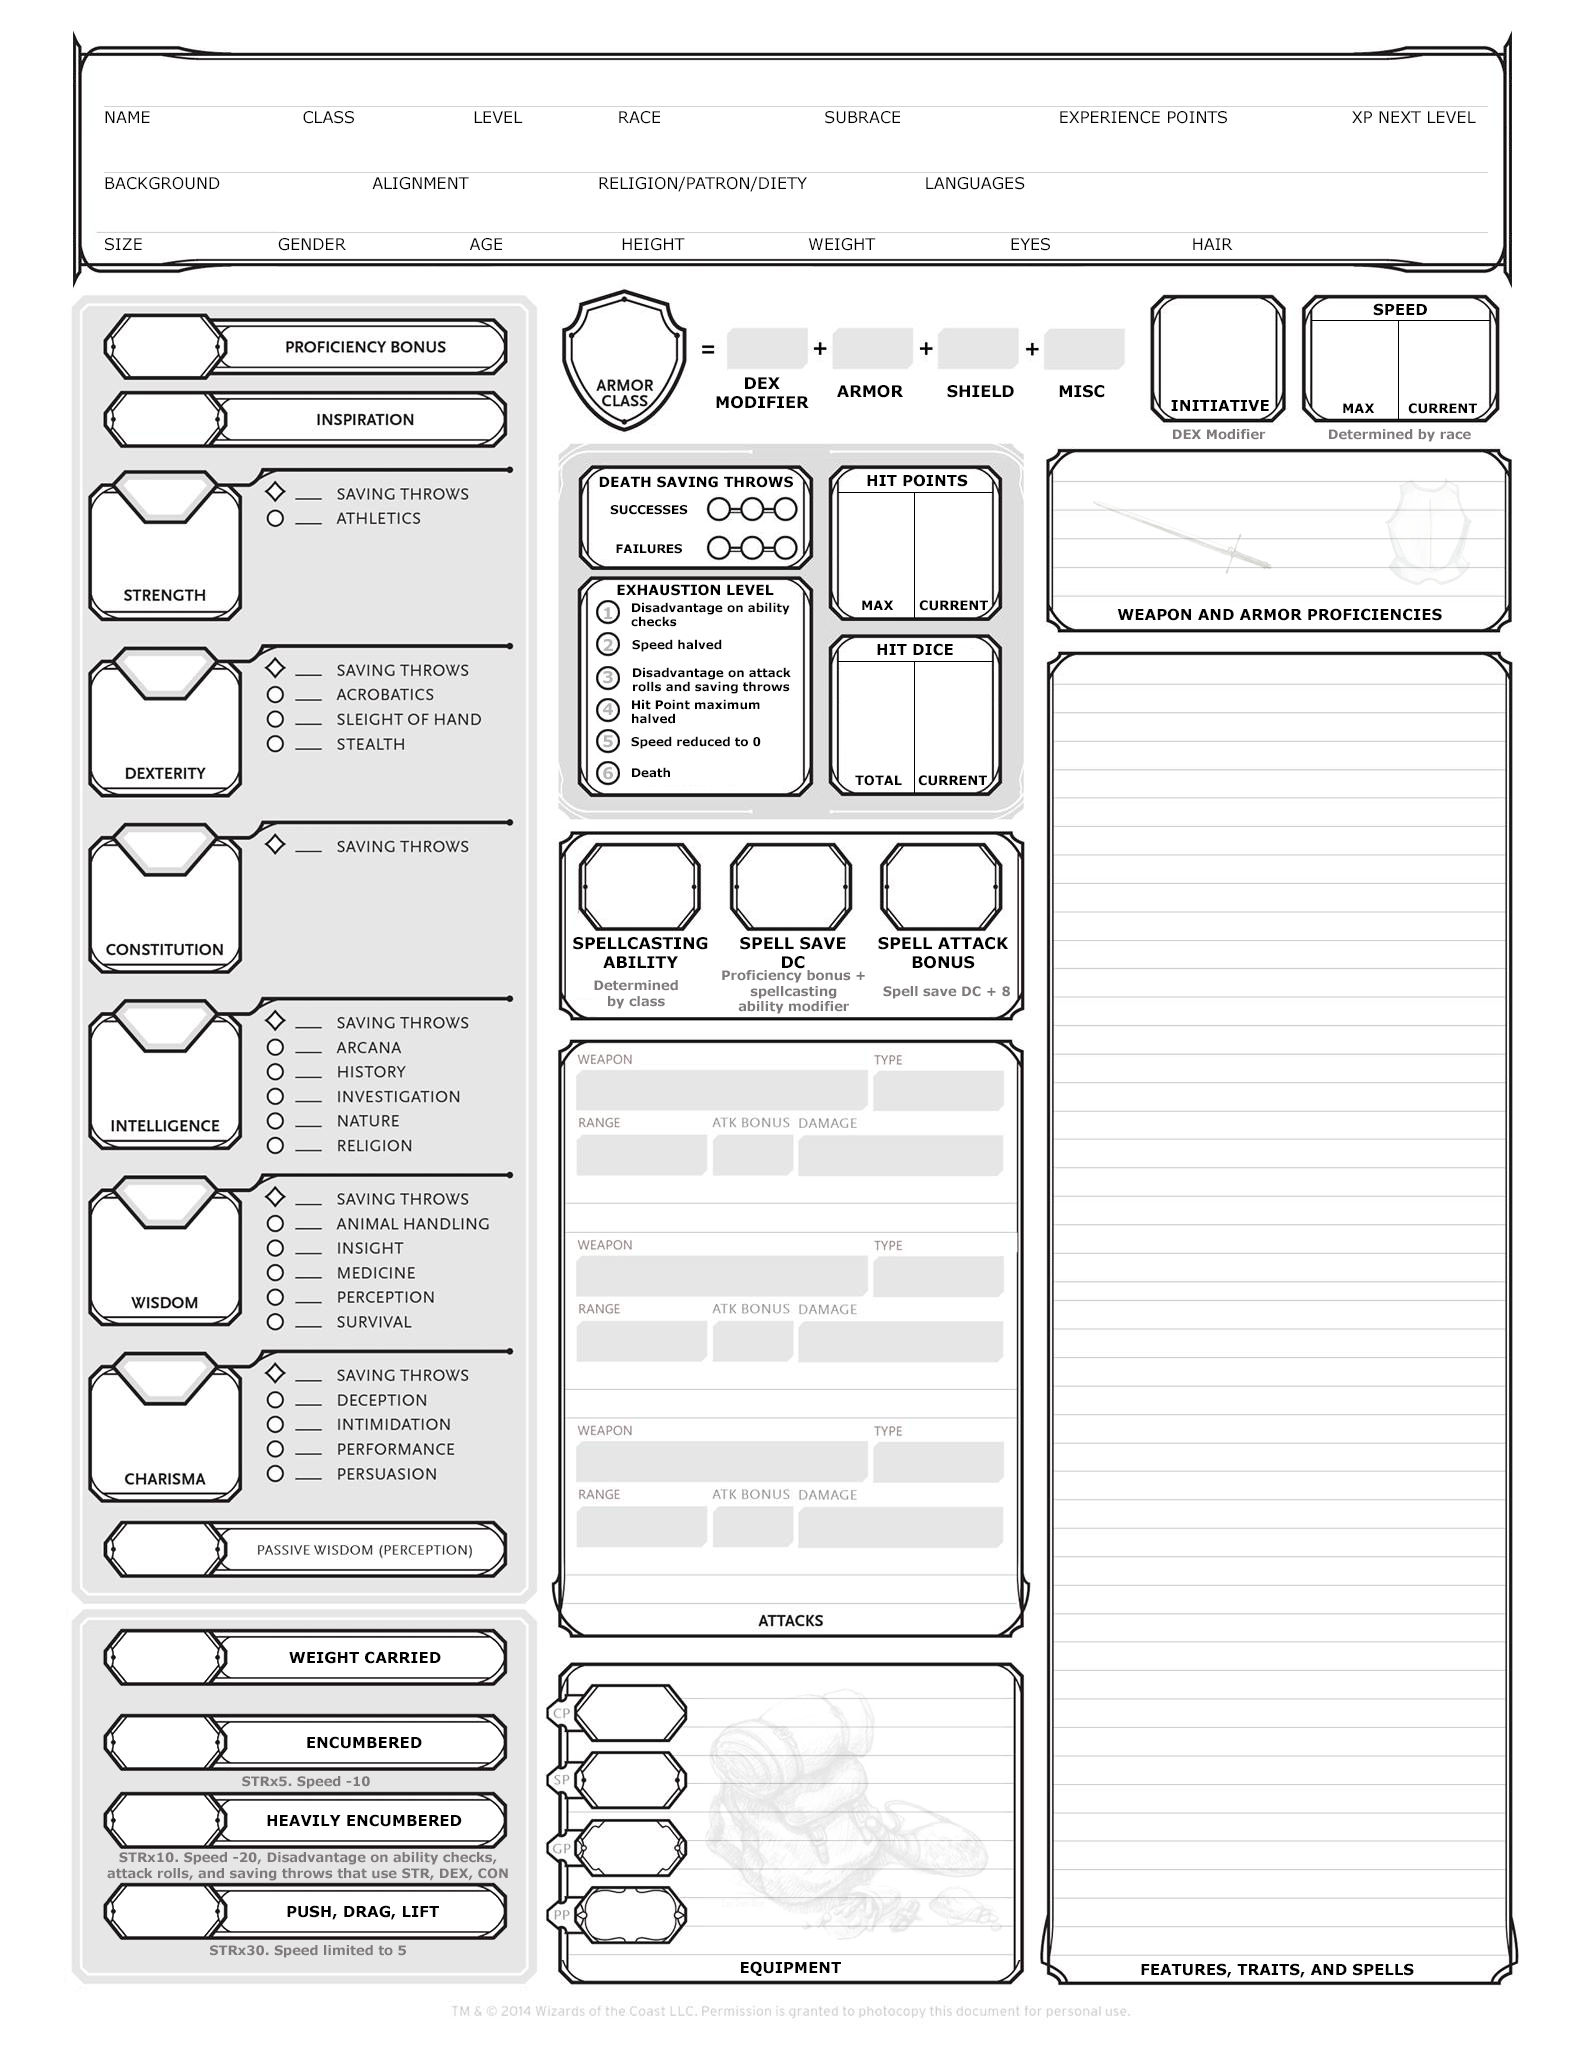 Dungeon and dragon 2nd edition character generator